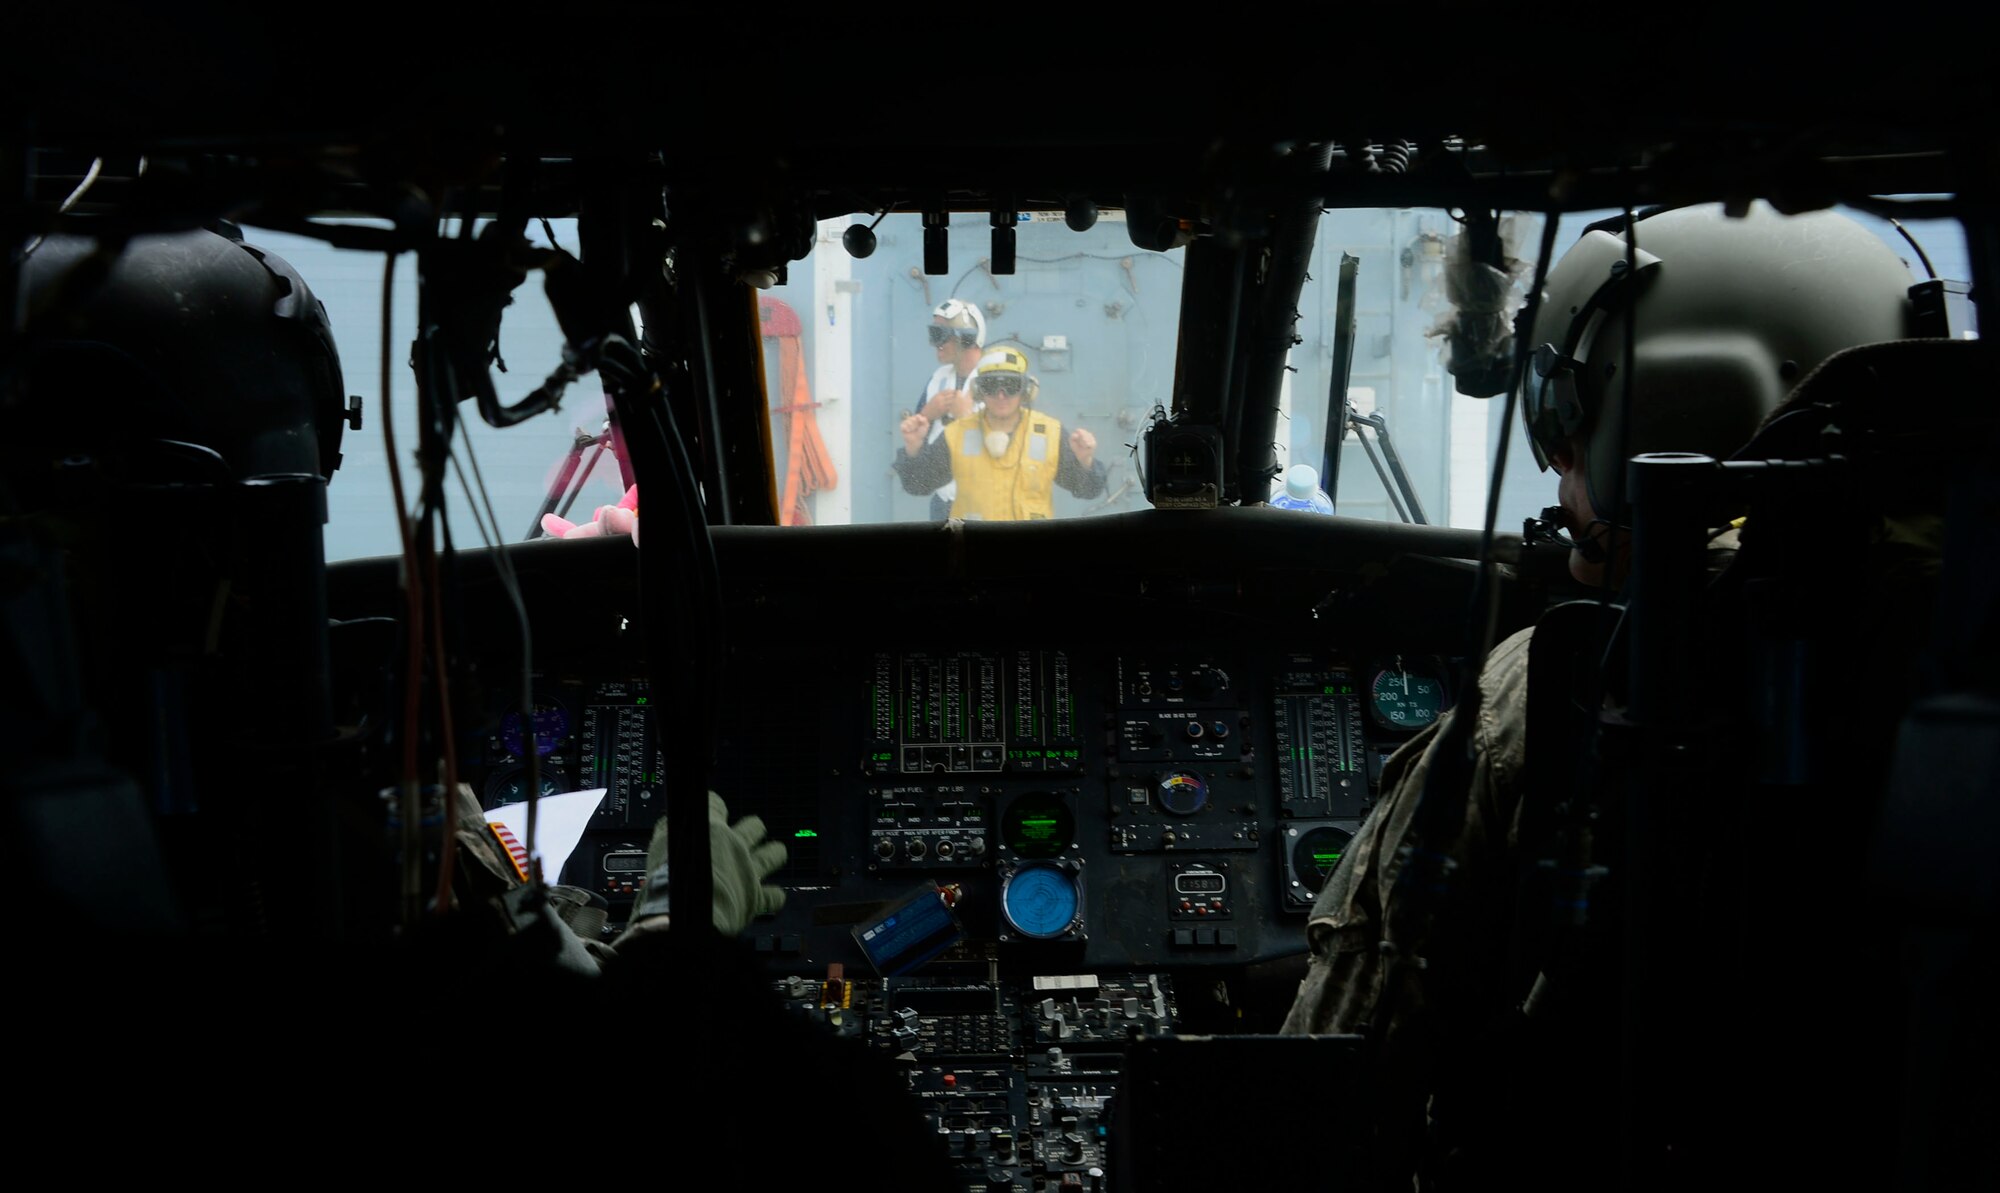 A U.S. Navy aircraft handling officer prepares members of the 1st Battalion, 228th Aviation Regiment for takeoff during deck landing qualifications off the coast of Honduras, Feb. 1, 2015.  The 1-228th Avn. Reg. aircrew participated in deck landing qualifications on board the USS Kauffman to qualify pilots and crew chiefs on shipboard operations.  Kauffman is on its final scheduled deployment to the U.S. Southern Command area of responsibility supporting multinational, counter-narcotics operation known as Operation Martillo. (U.S. Air Force photo/Tech. Sgt. Heather Redman)